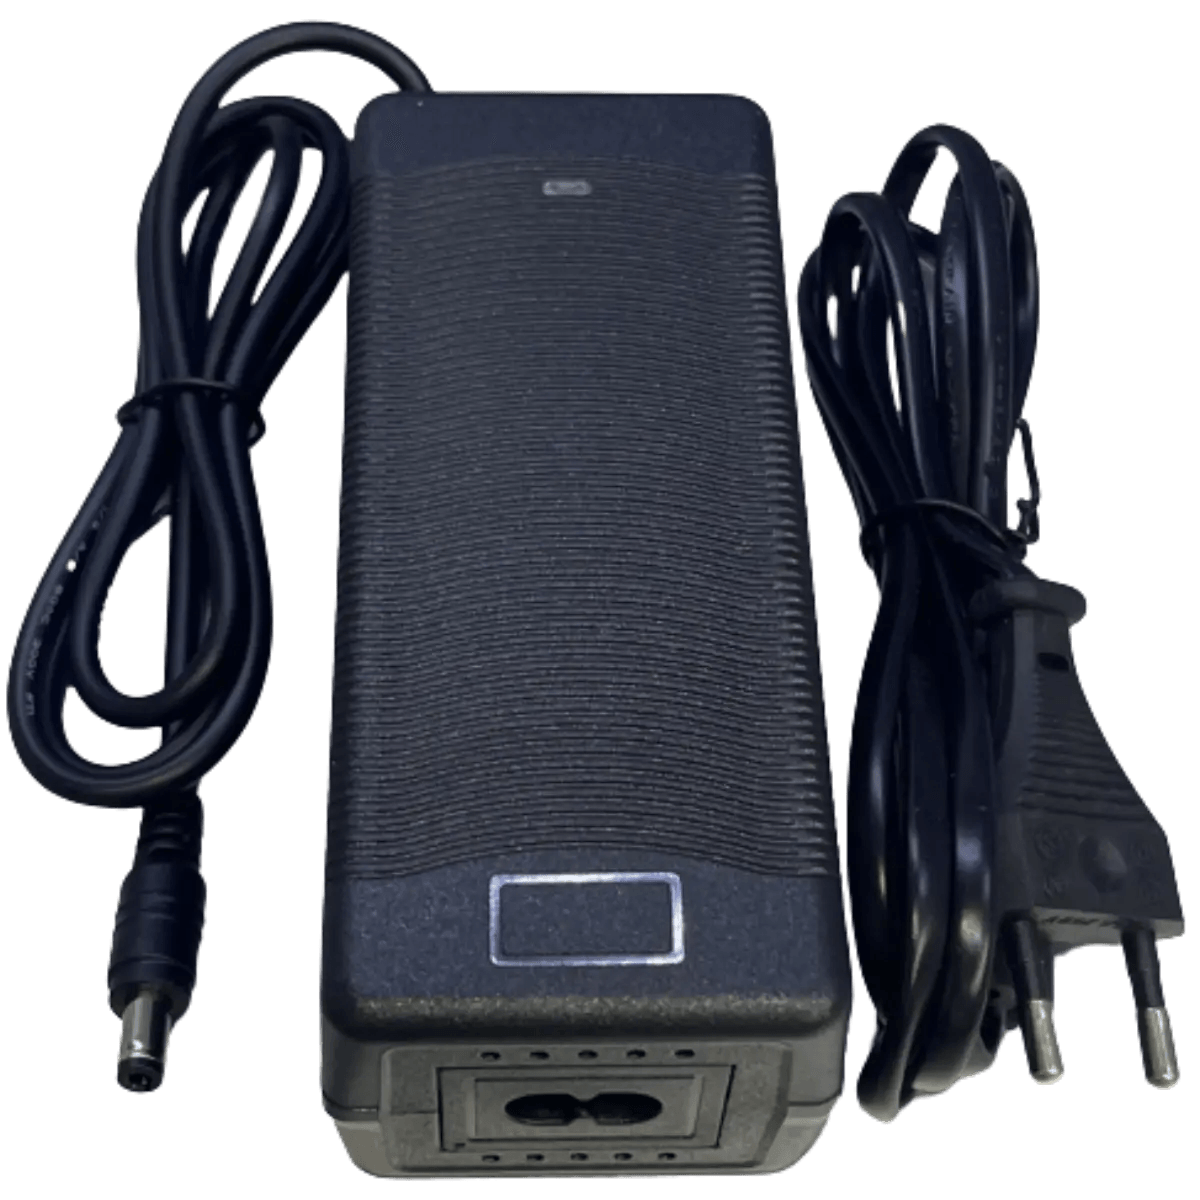 Chargeur 42V 3A fiche 5.5x2.5 mm